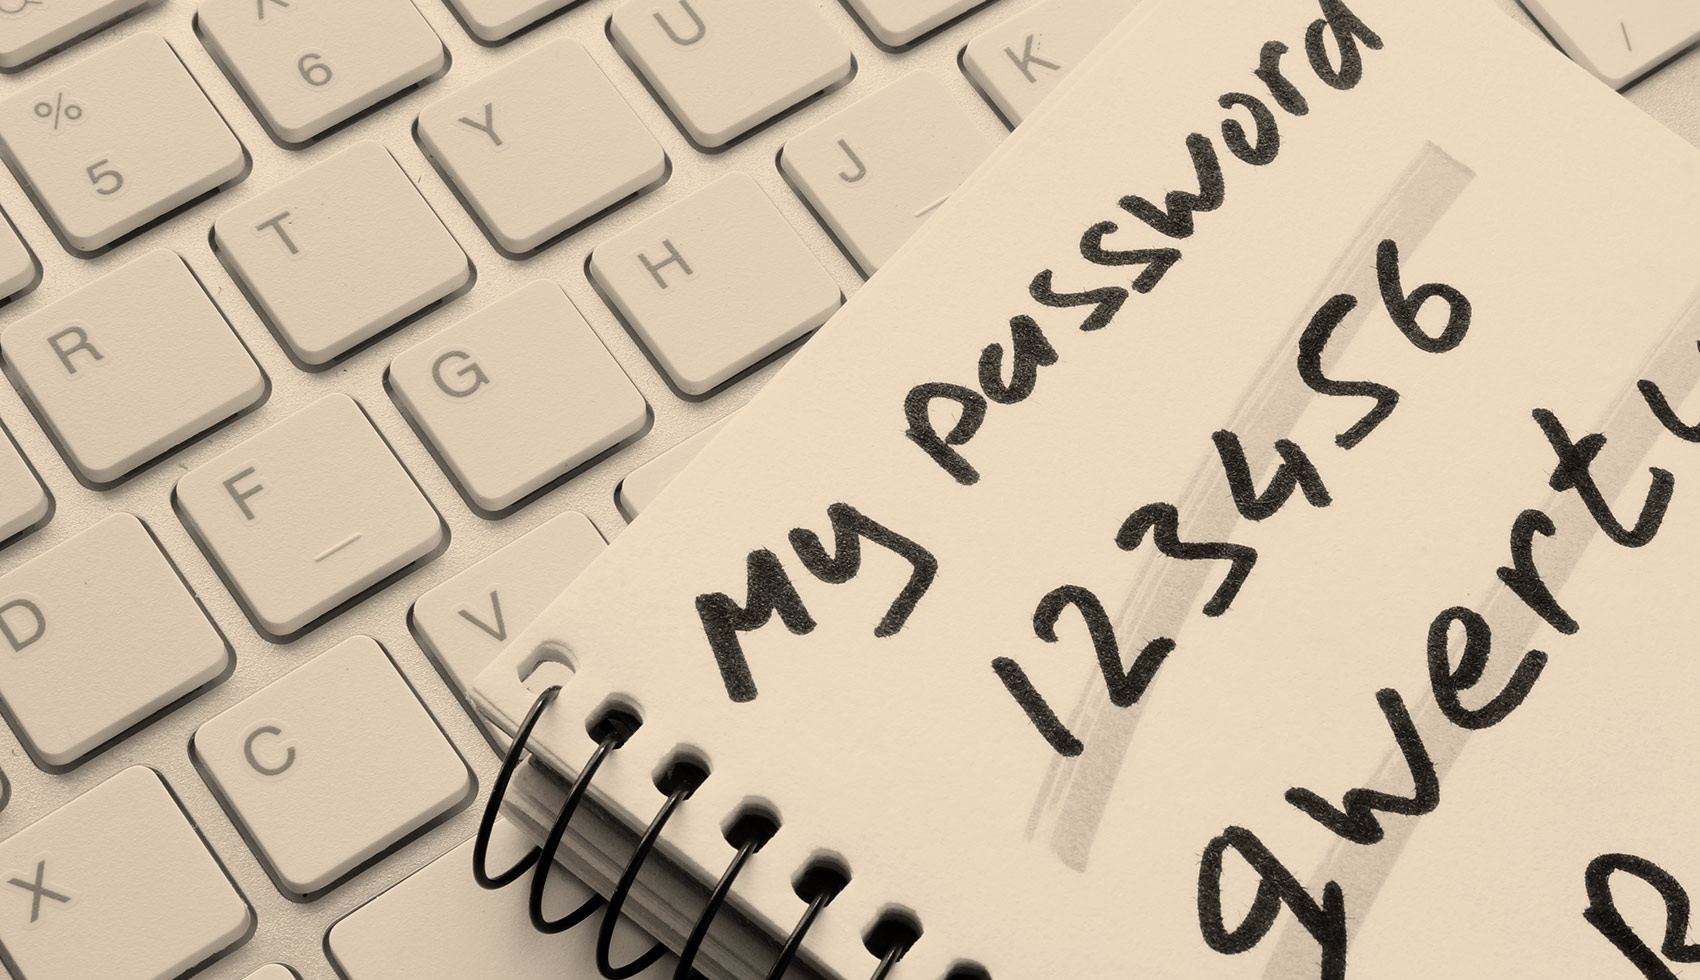 Provide clear guidelines for password creation.